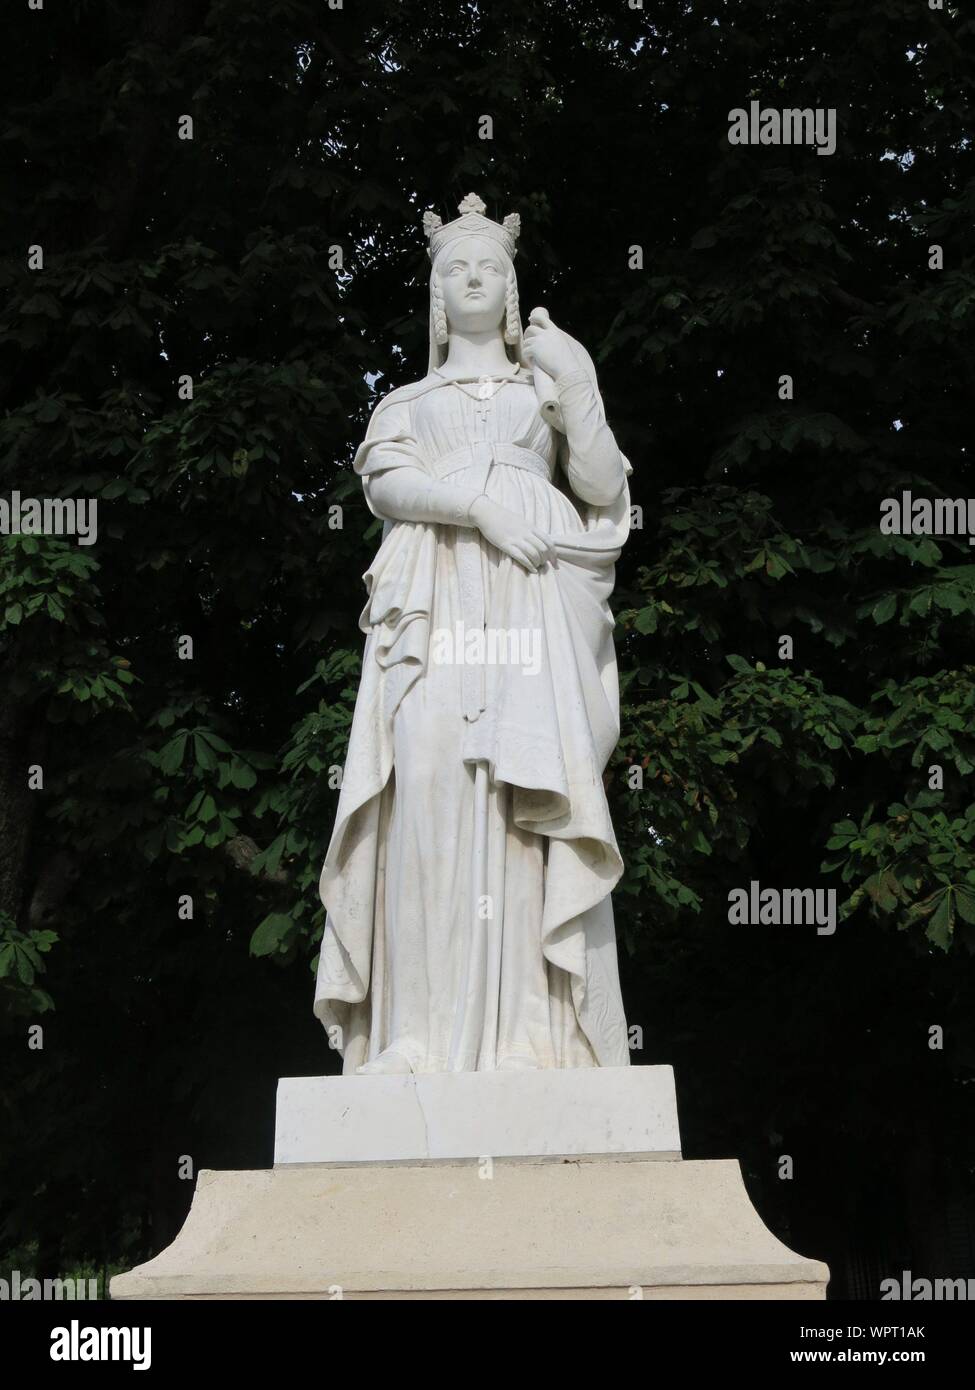 French History: one of the Queens of France Statues, this statue is of the Merovingian Queen Balthild who died in 680 and was later canonised. Stock Photo